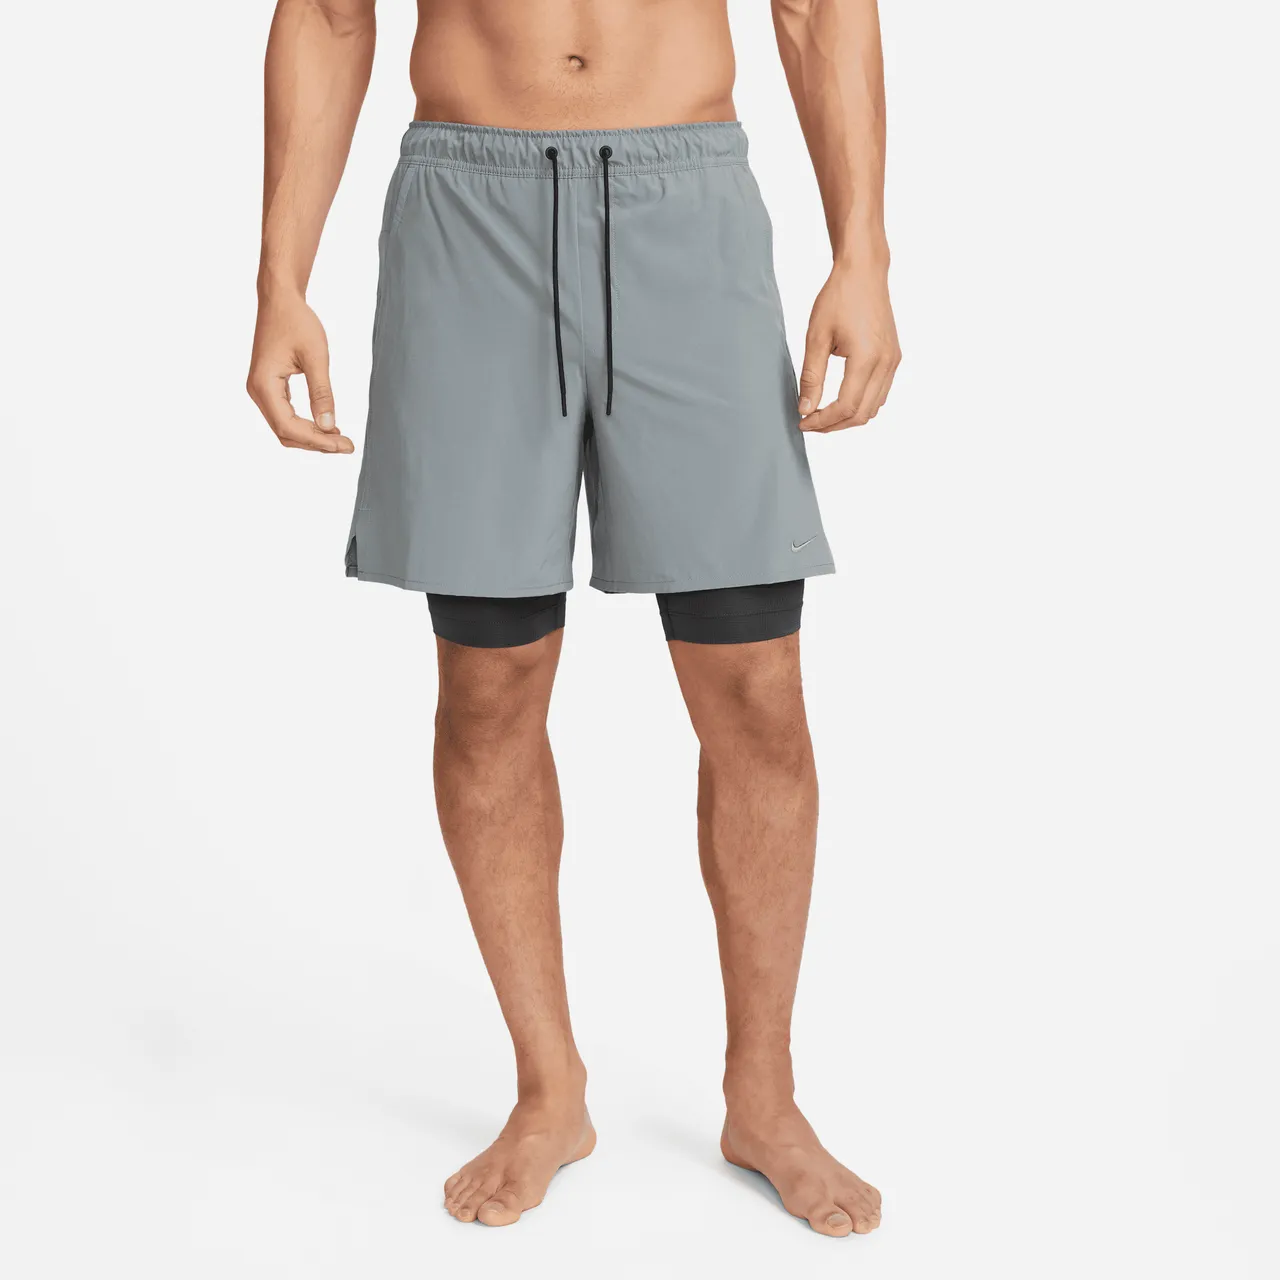 Nike Unlimited Men's Dri-FIT 18cm (approx.) 2-in-1 Versatile Shorts - Grey - Polyester